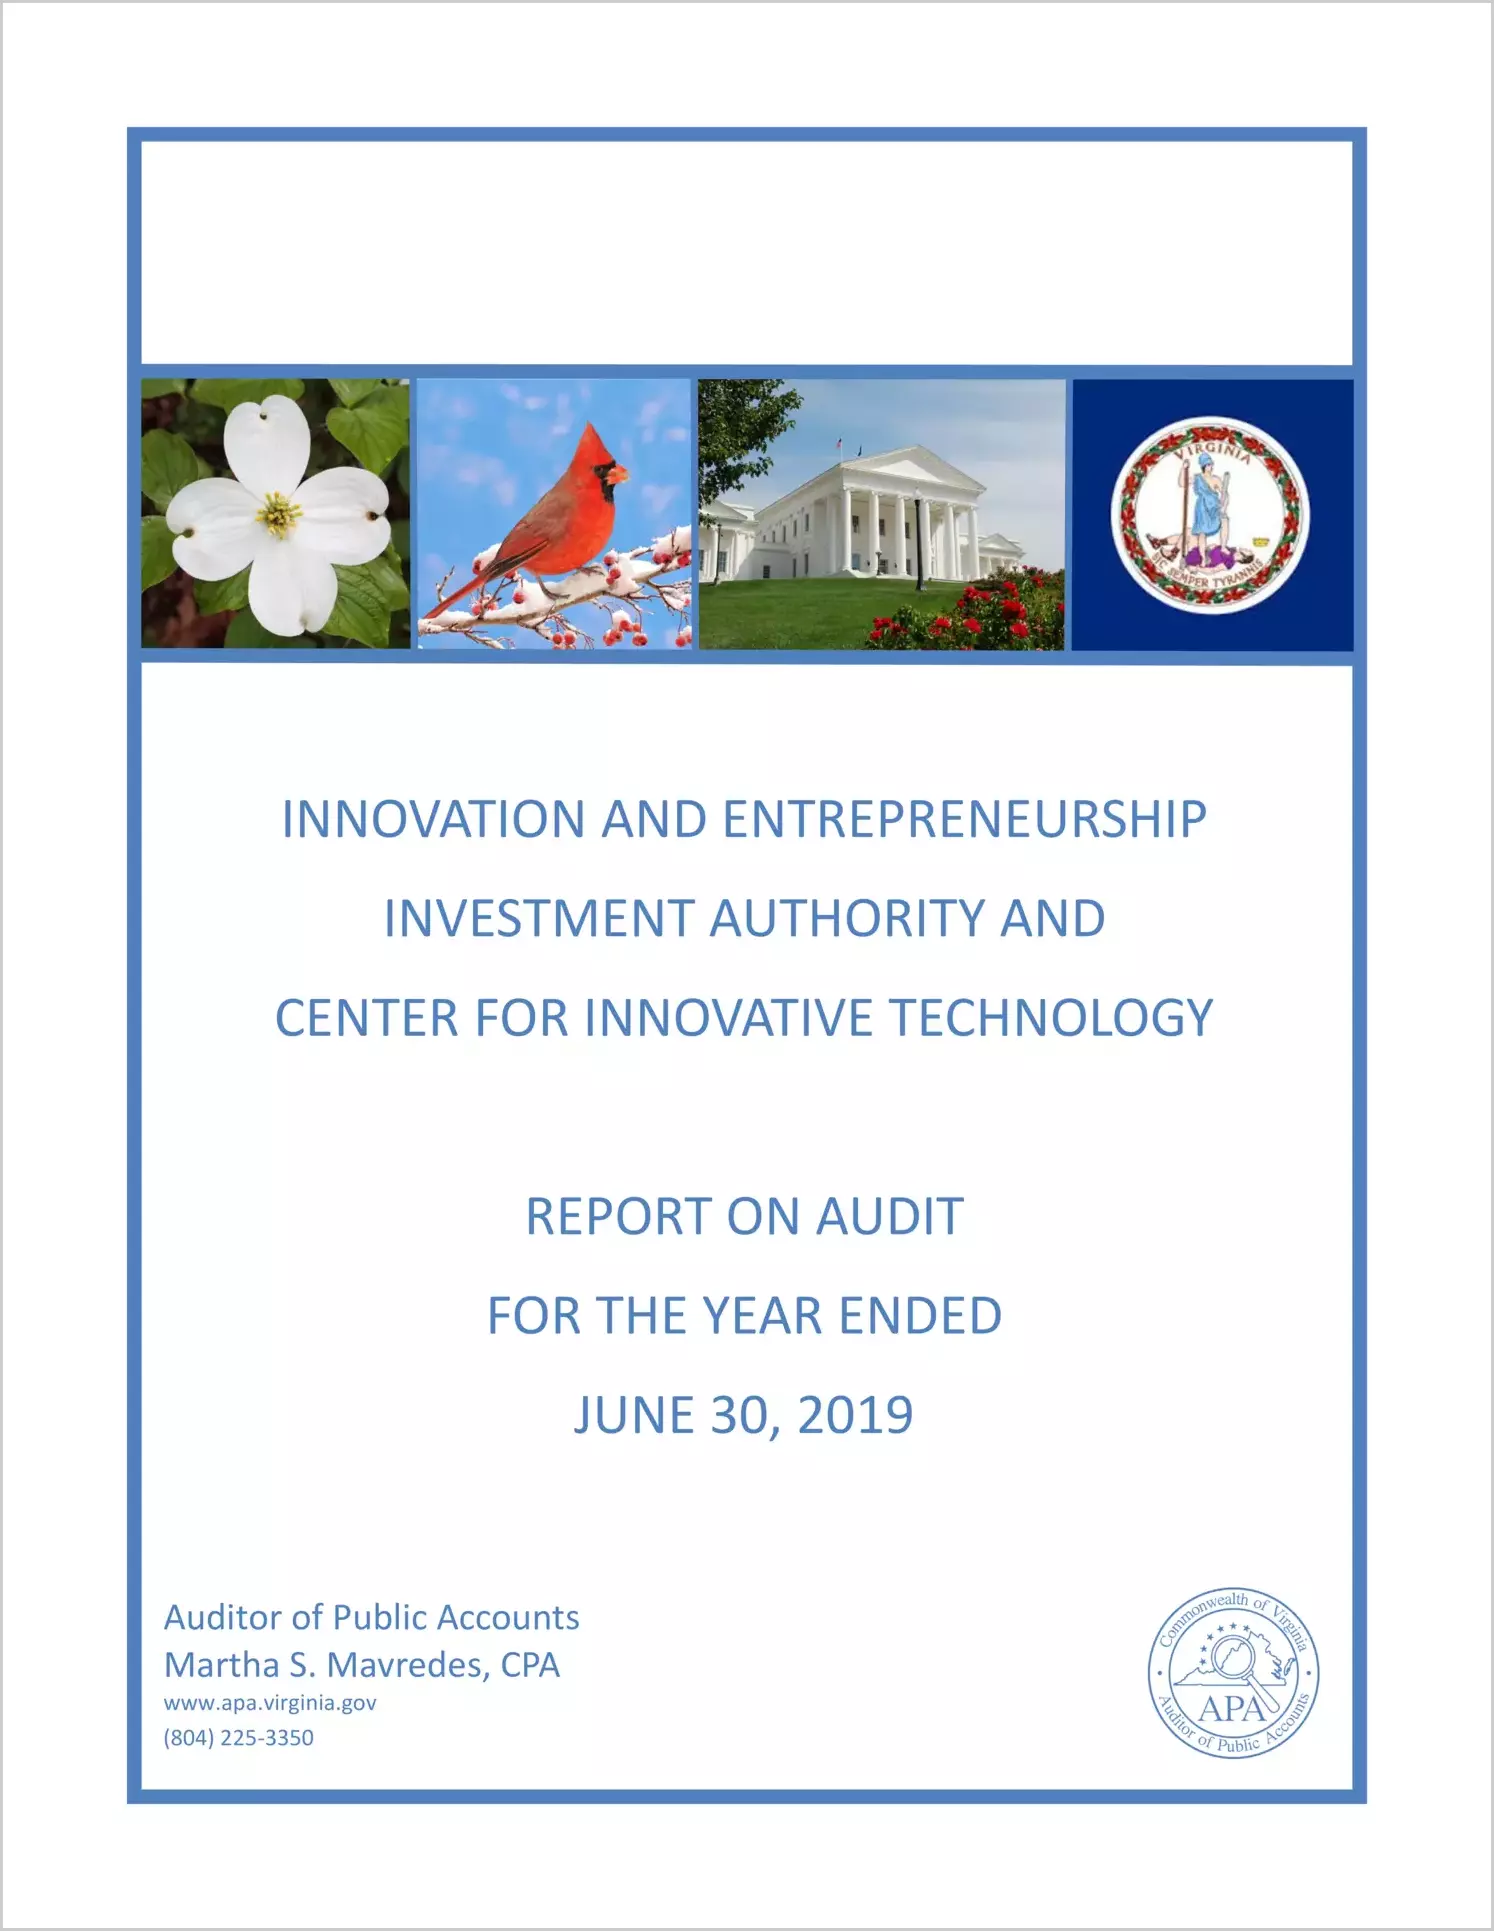 Innovation and Entrepreneurship Investment Authority and Center for Innovative Technology for the year ended June 30, 2019